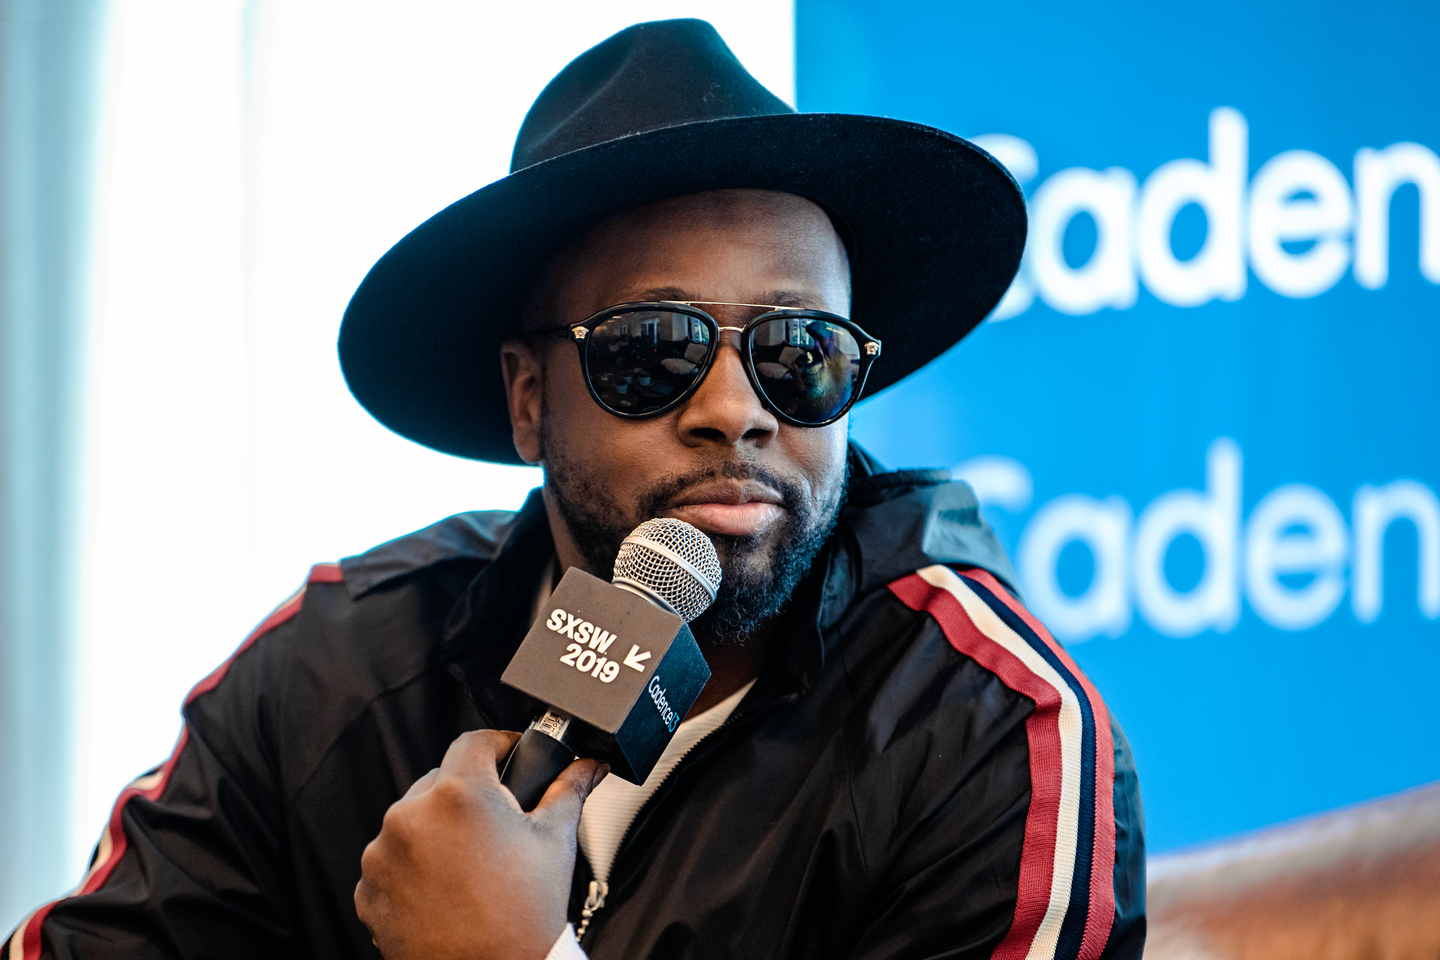 Wyclef Jean at the And The Writer Is... Podcast – Photo by Denise Enriquez